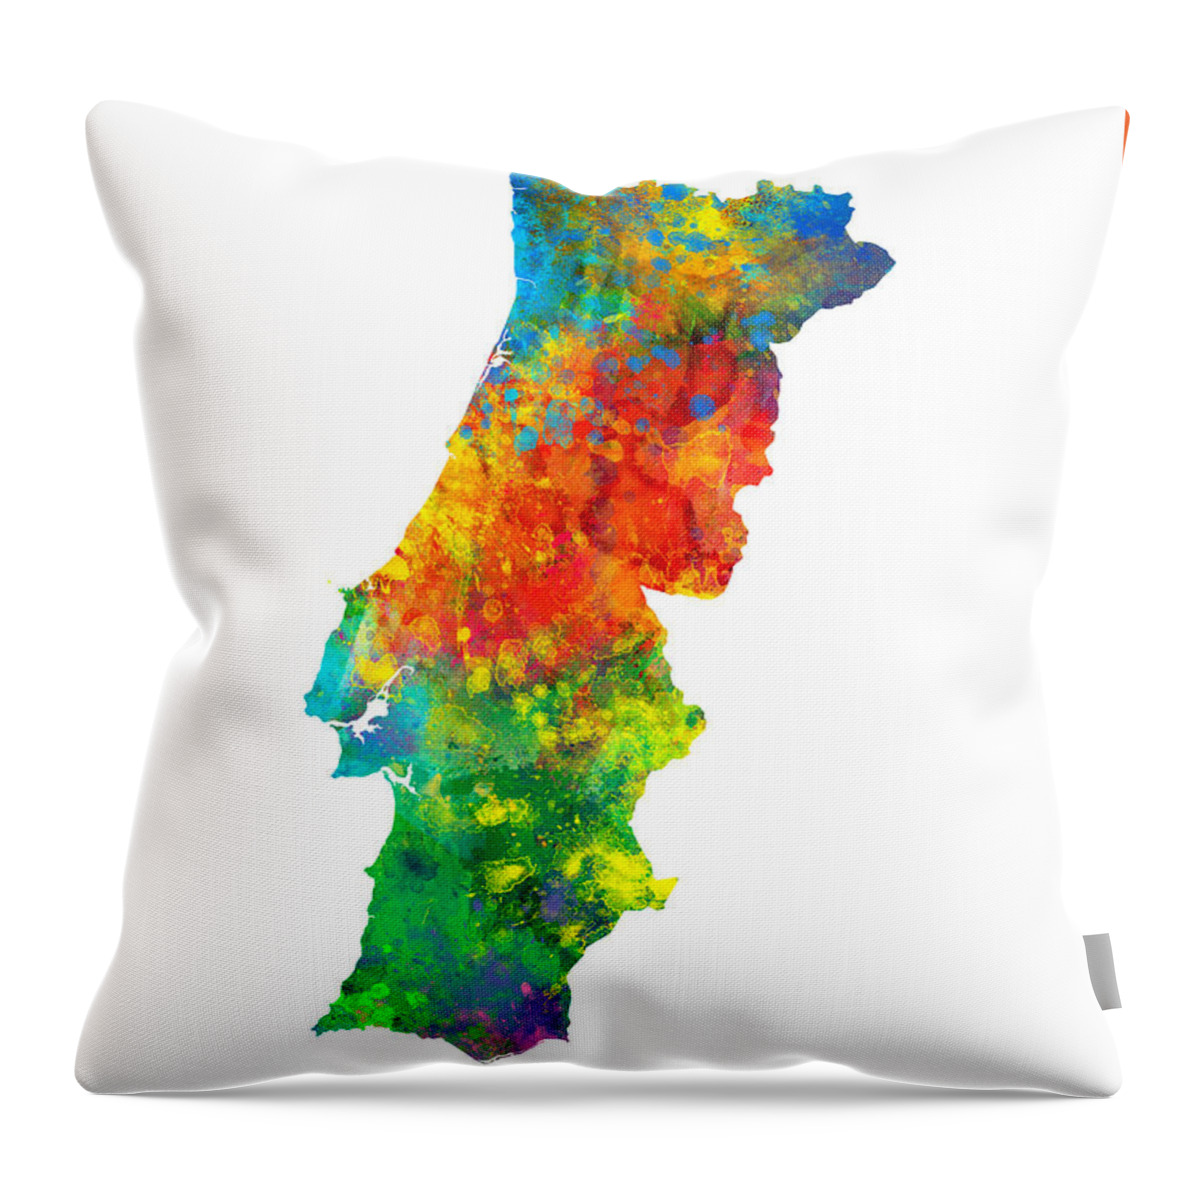 Portugal Throw Pillow featuring the digital art Portugal Watercolor Map by Michael Tompsett